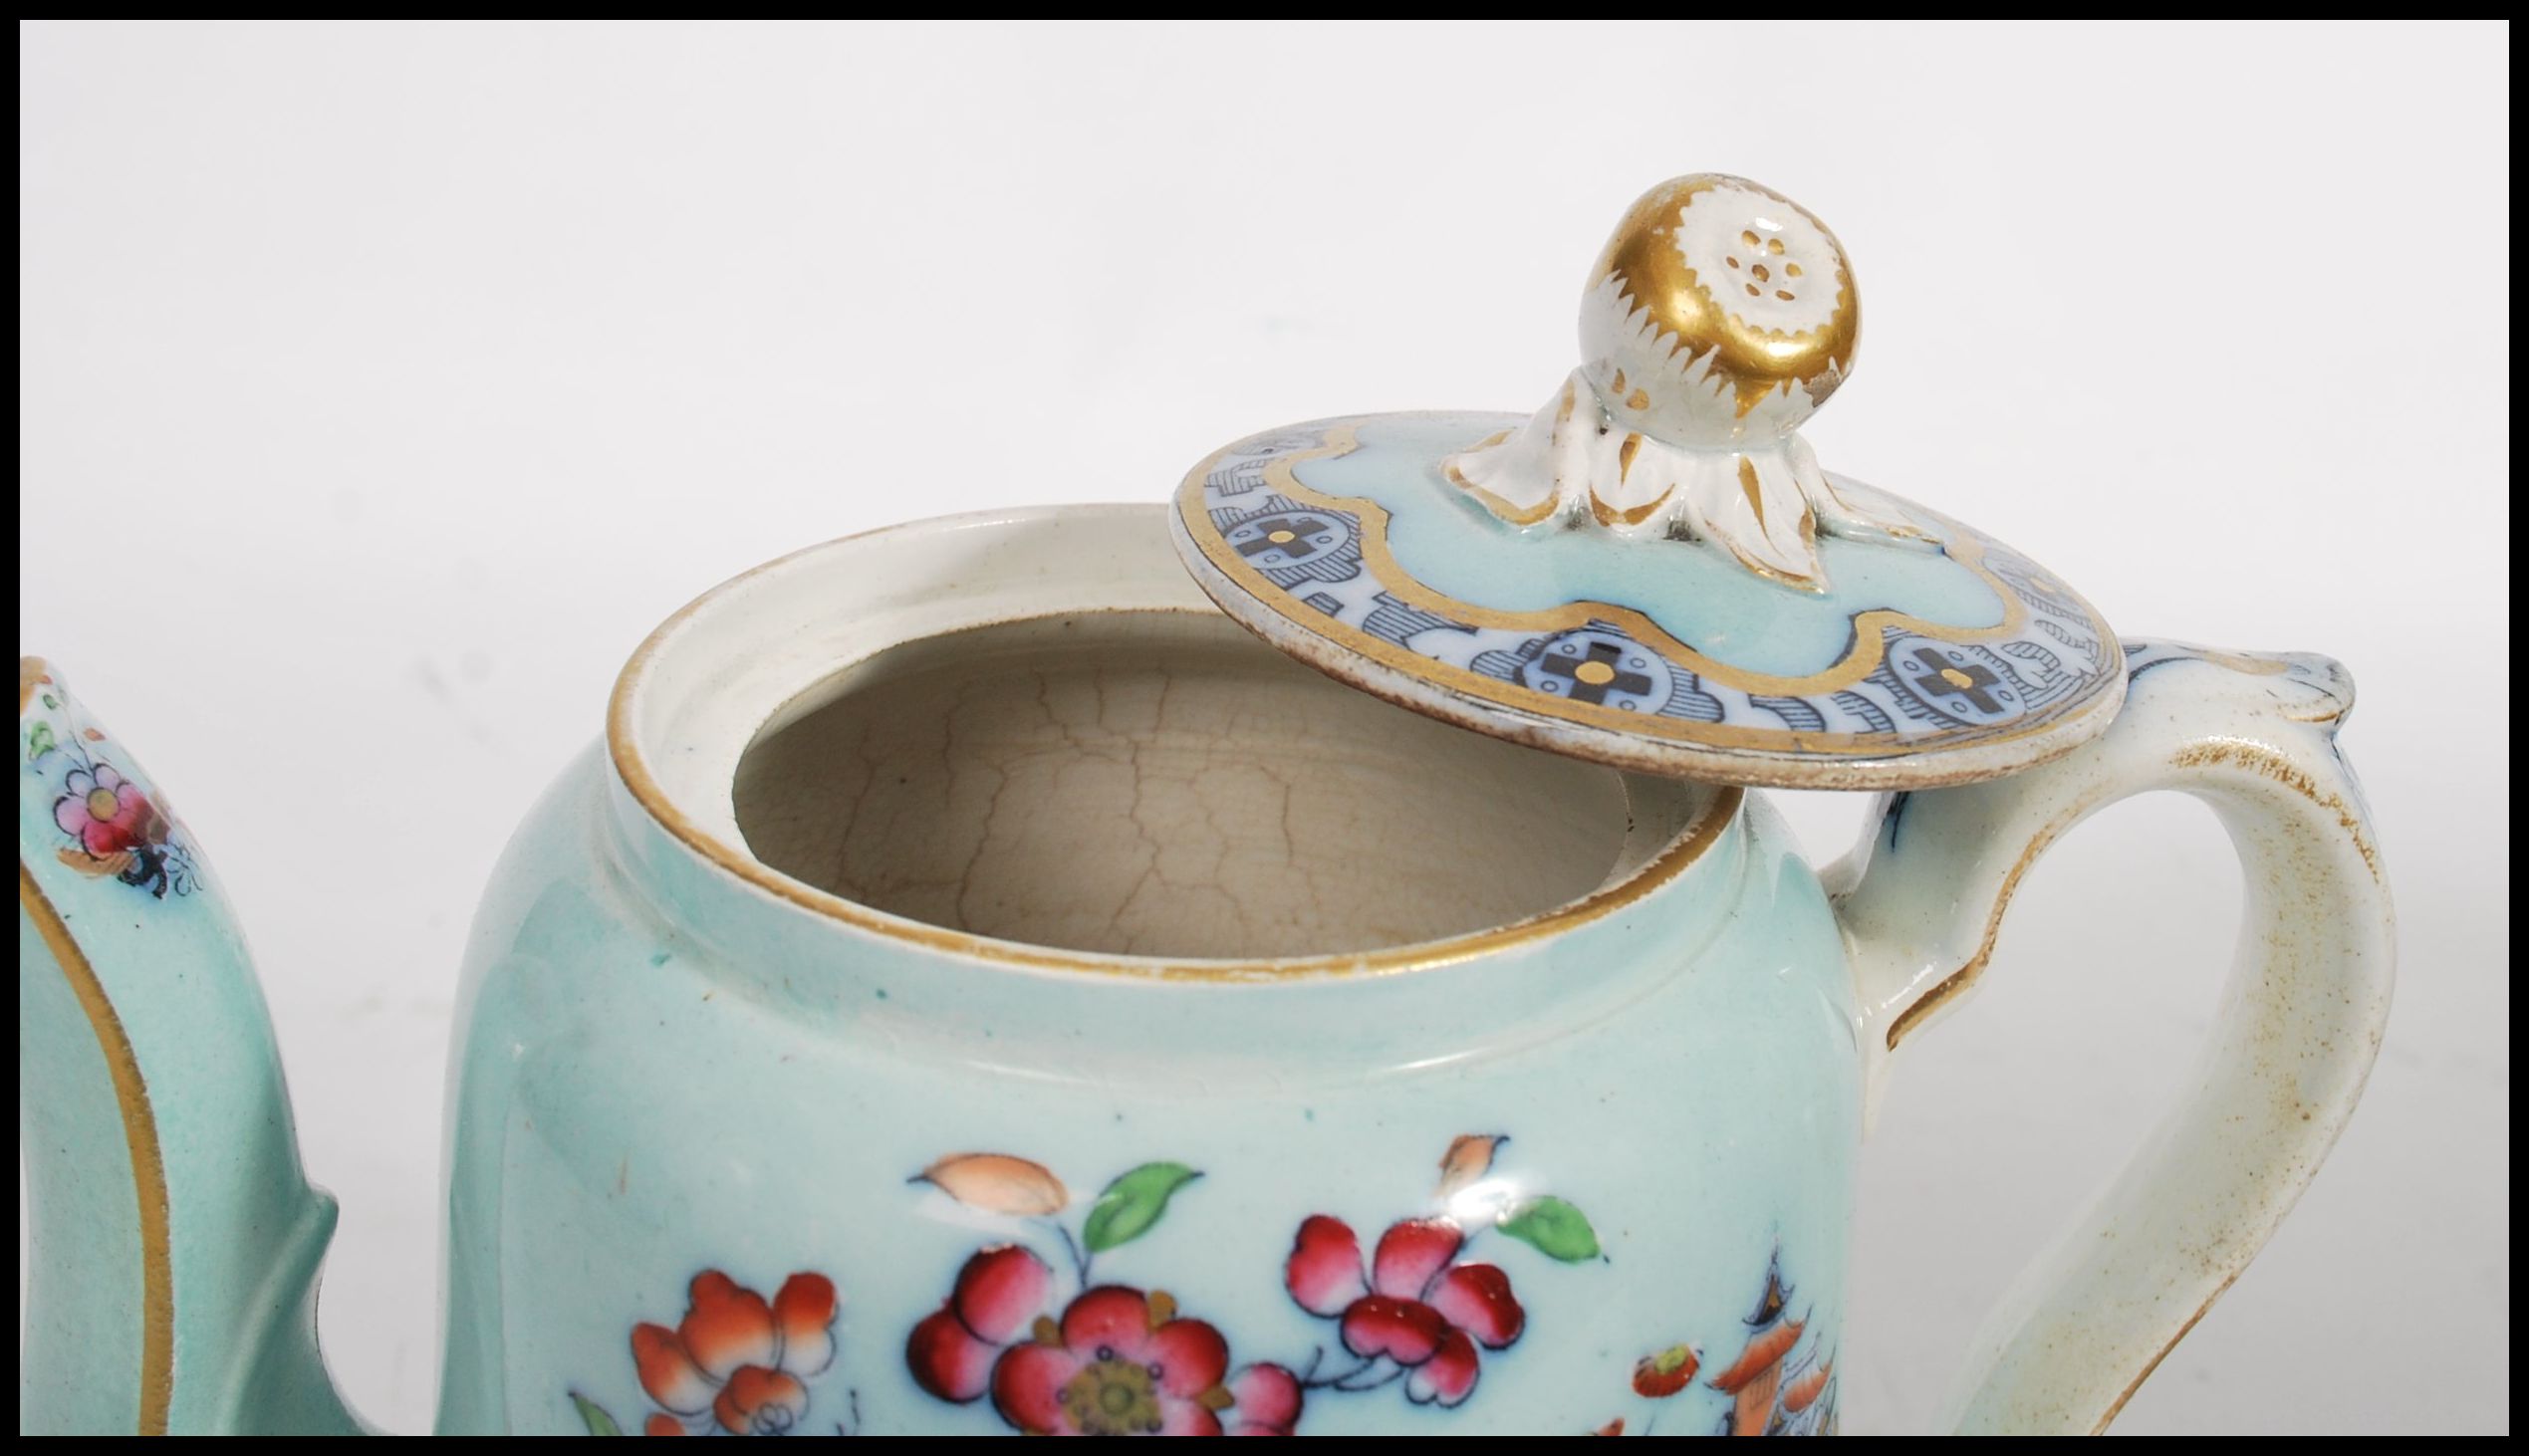 A late 19th early 20th century Staffordshire china teapot, transfer printed with scenes of - Image 6 of 7